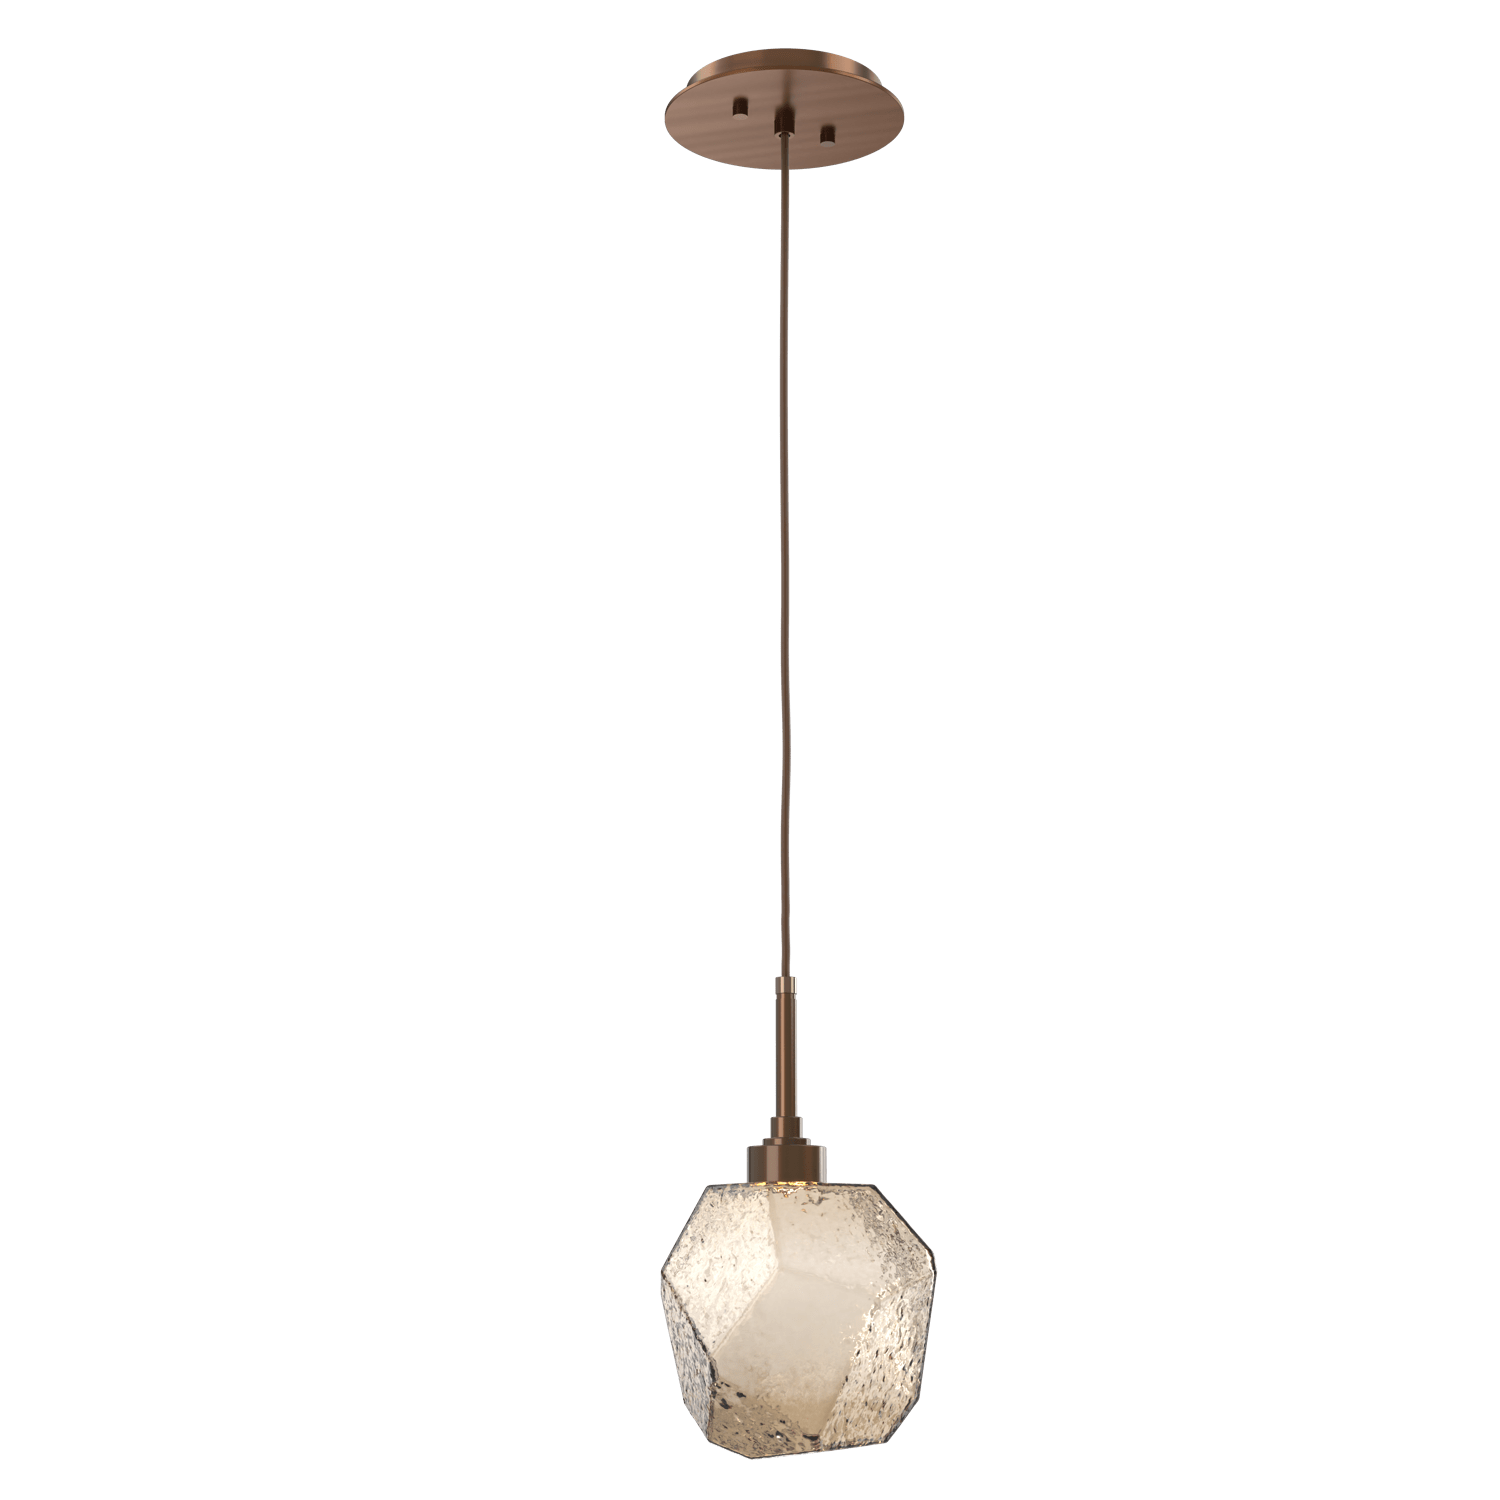 LAB0039-01-RB-B-Hammerton-Studio-Gem-pendant-light-with-oil-rubbed-bronze-finish-and-bronze-blown-glass-shades-and-LED-lamping